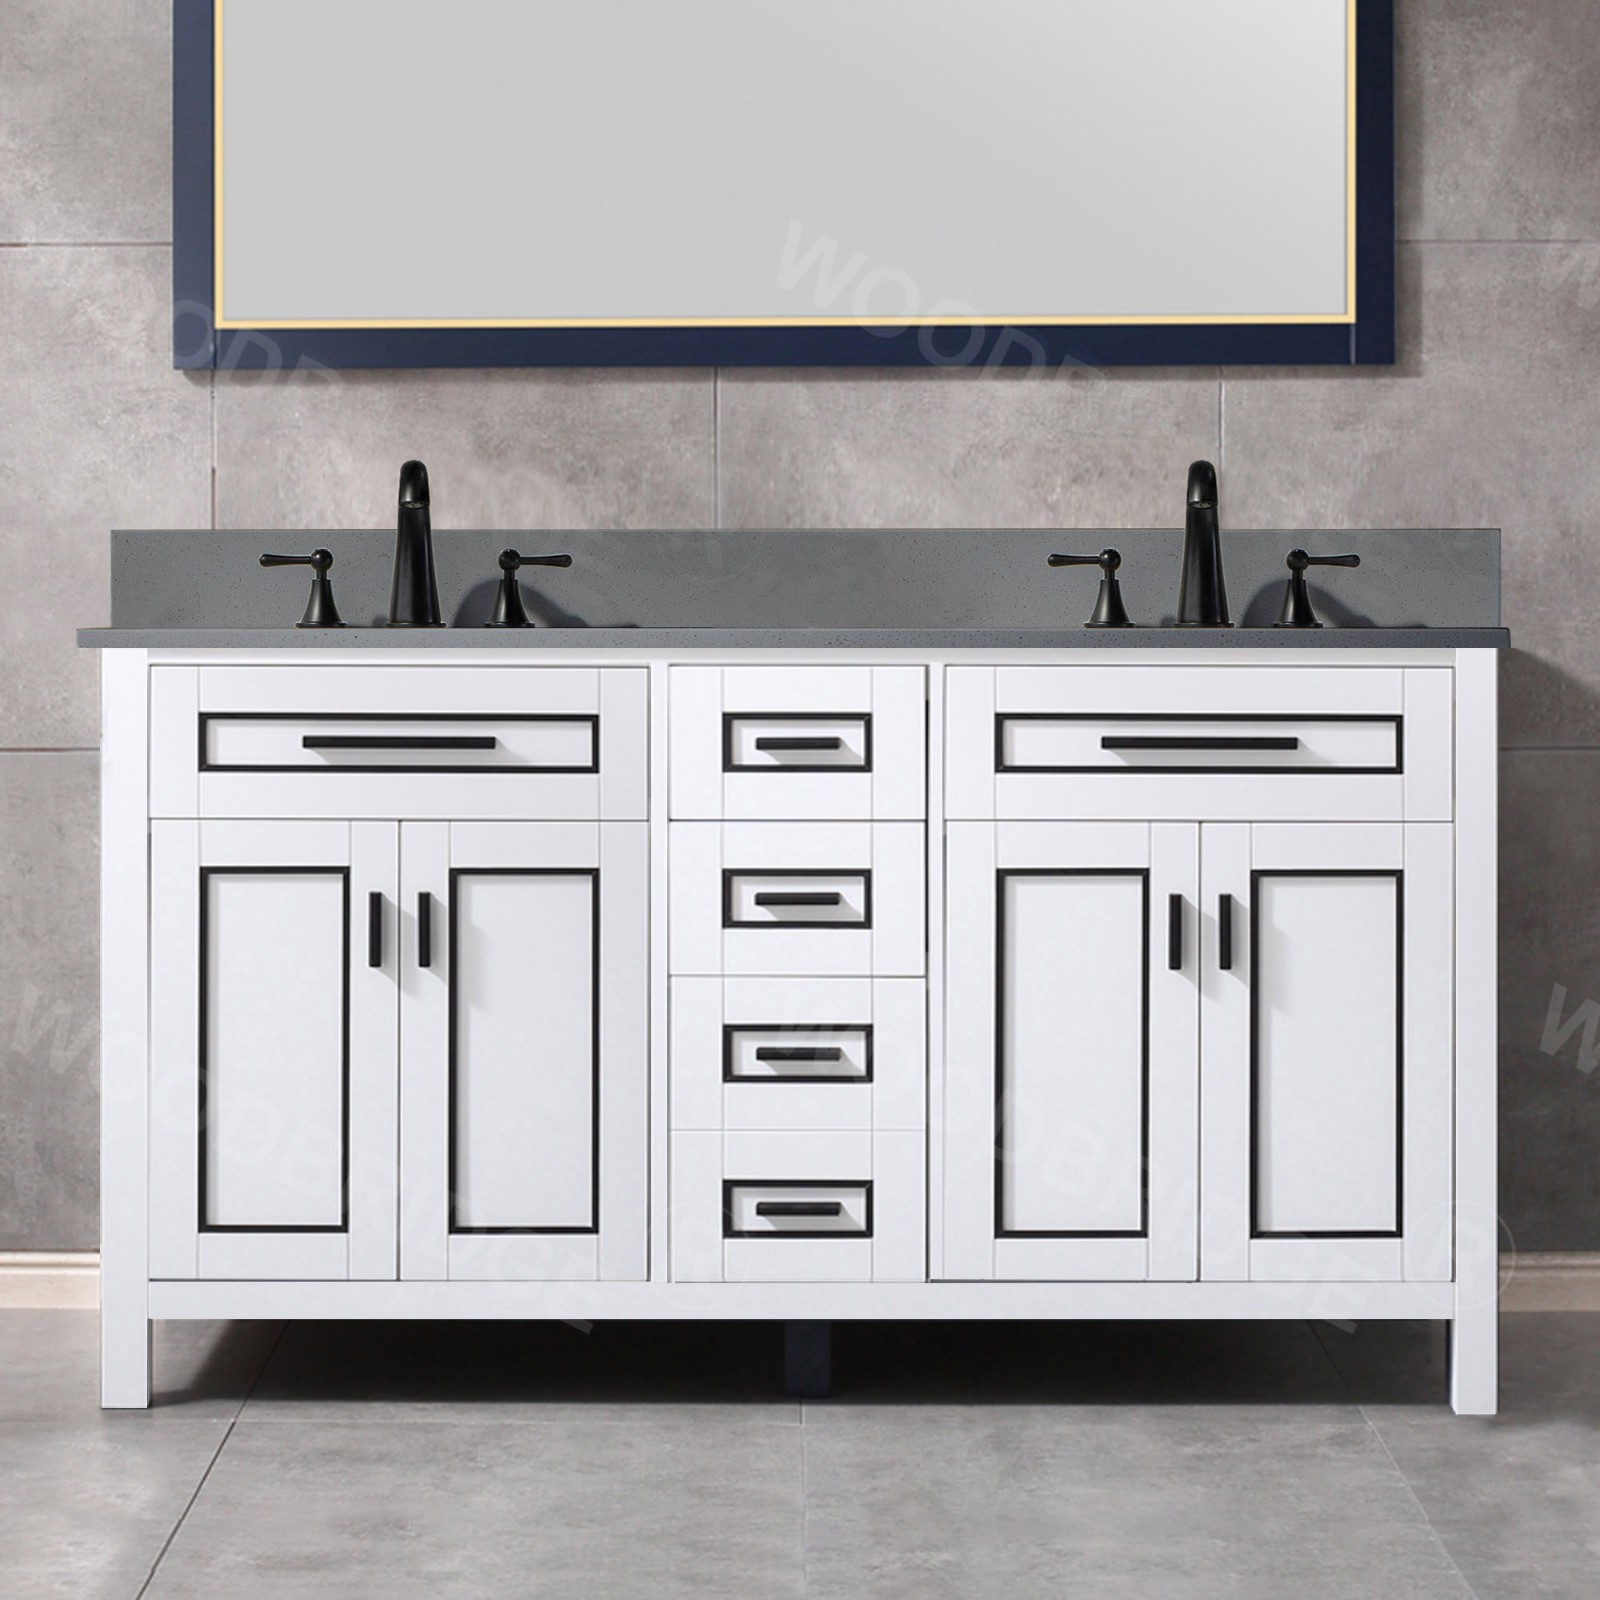  WOODBRIDGE Milan  61” Floor Mounted Single Basin Vanity Set with Solid Wood Cabinet in White and Engineered stone composite Vanity Top in Dark Gray with Pre-installed Undermount Rectangle Bathroom Sink in White and Pre-Drilled 3-Hole for 4-inch Centerset_4606